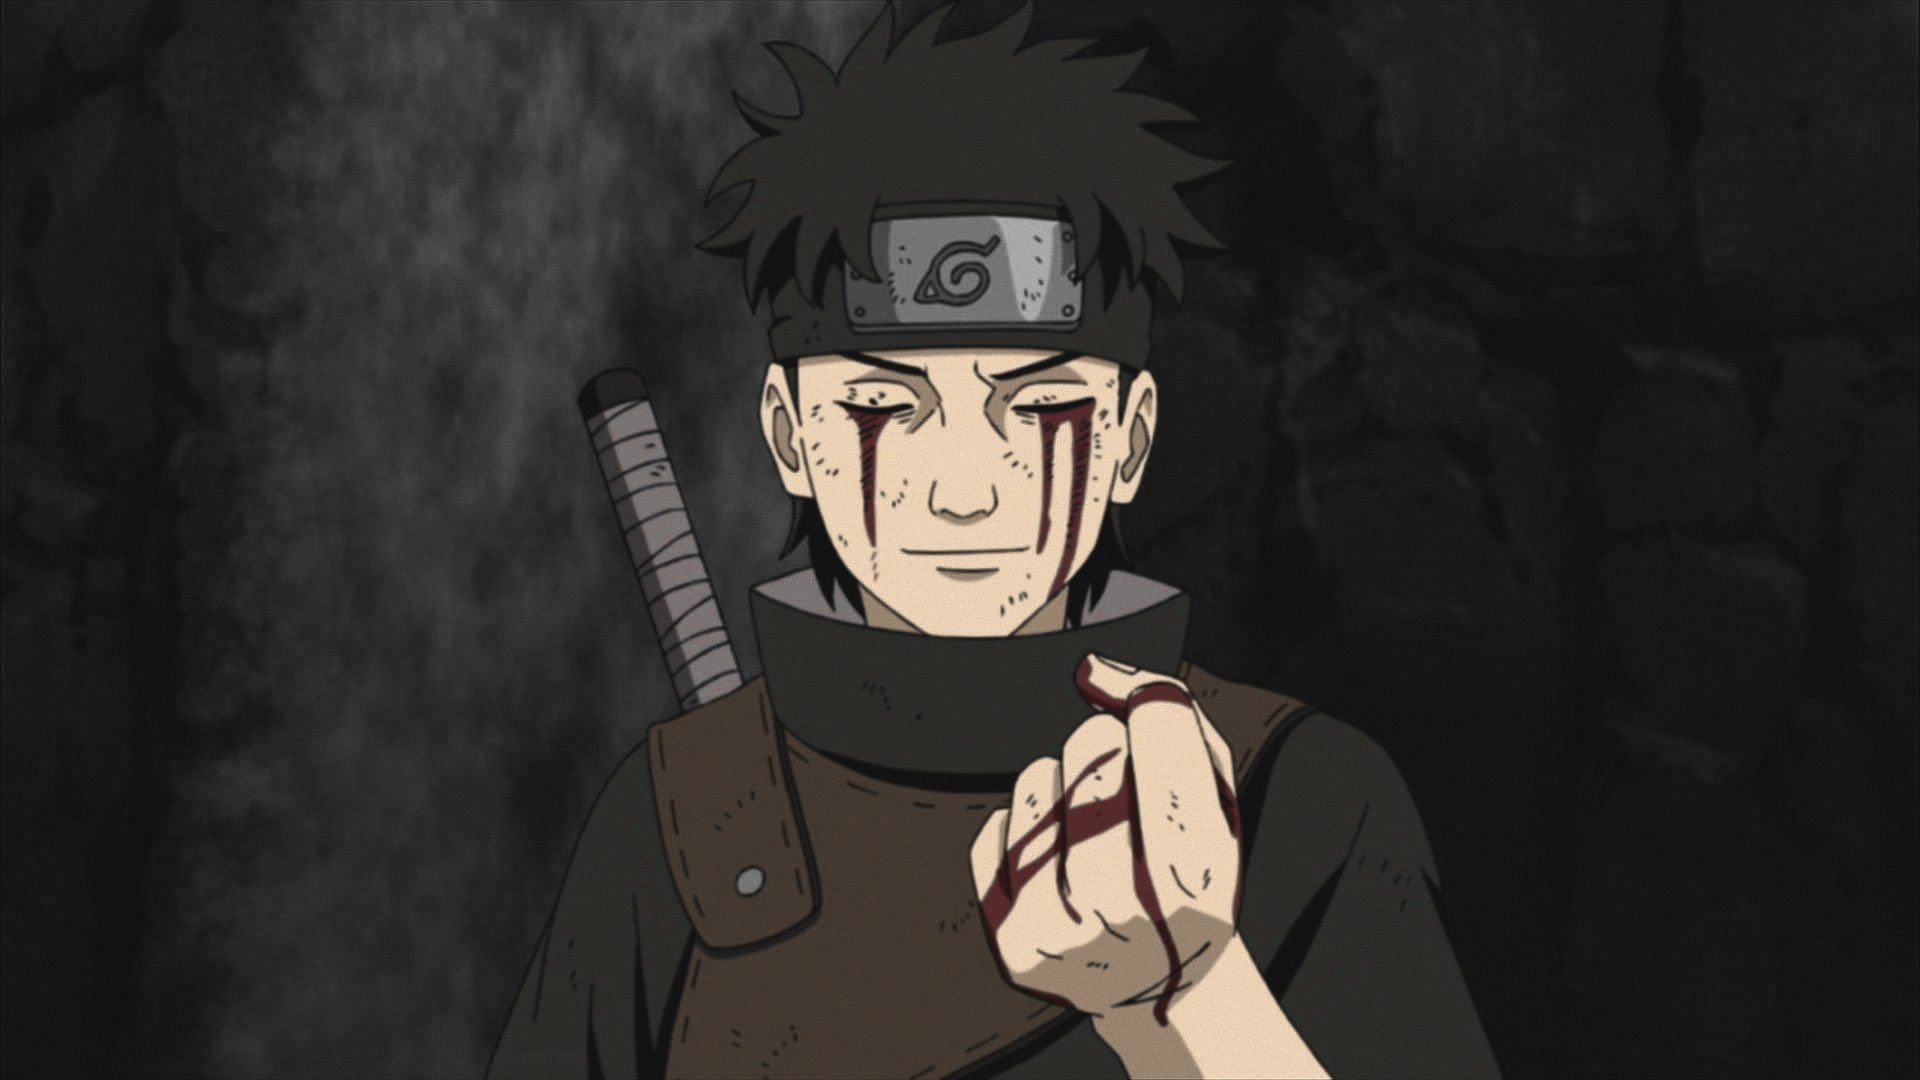 Shisui entrusts his legacy and left eye to Itachi before taking the plunge into the Naka River (Image via Studio Pierrot)